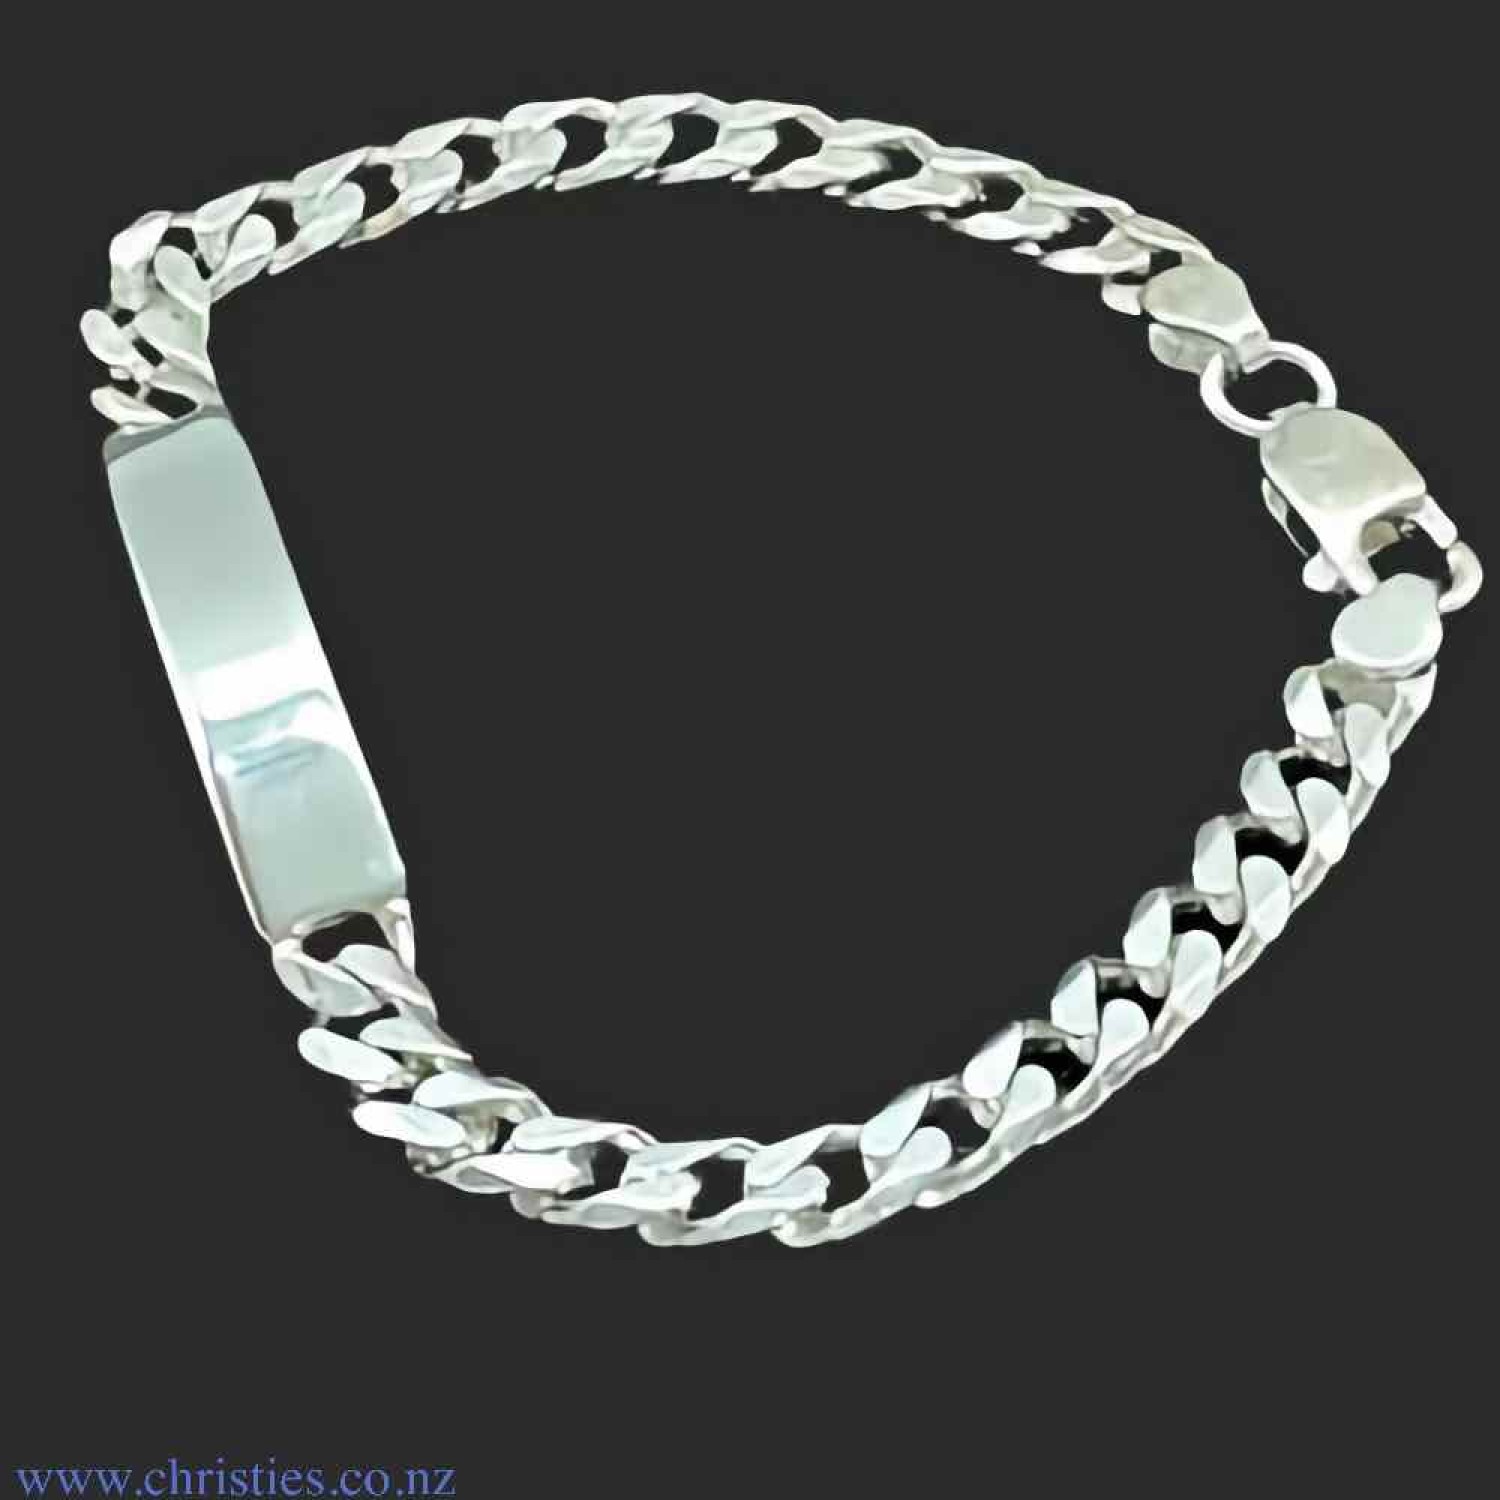 IDCD175H6C20 Sterling Silver ID Curb Link Bracelet. Medium weight  Identification bracelet crafted in 925 sterling silver  Afterpay - Split your purchase into 4 instalments - Pay for your purchase over 4 instalments, due every two weeks. You’l @christies.